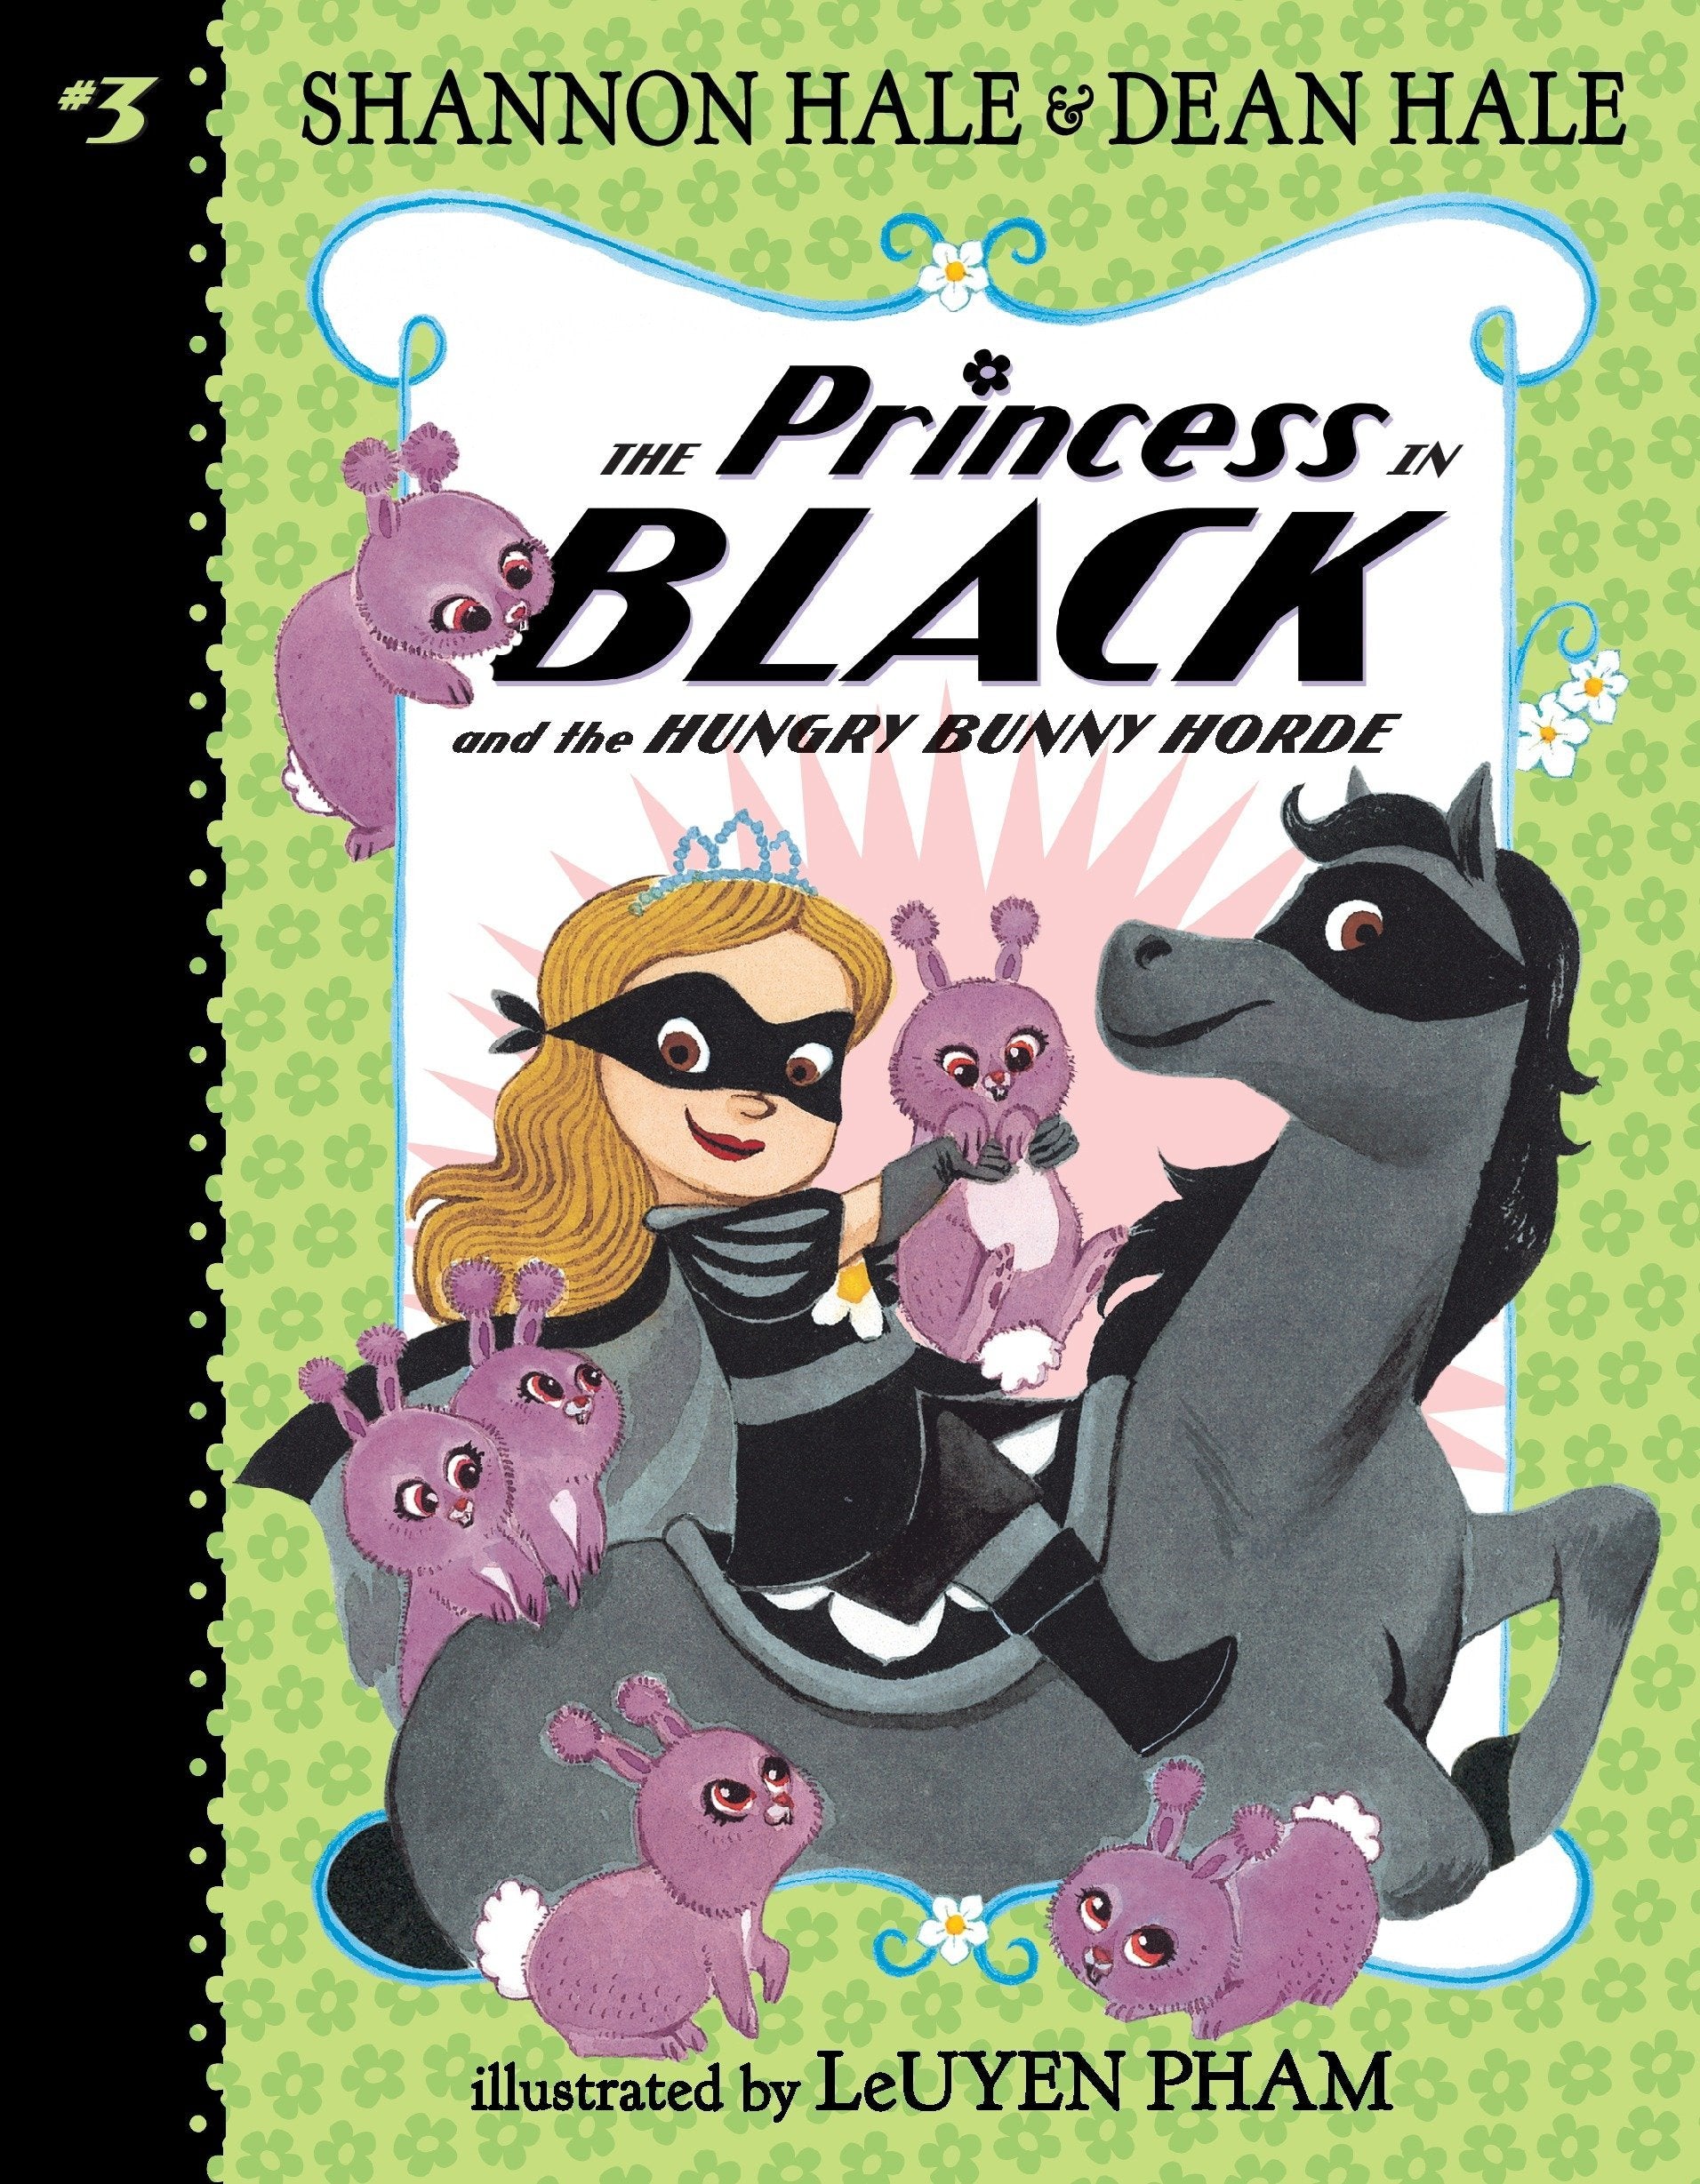 The Princess in Black & Hungry Bunny Horde - Book 3